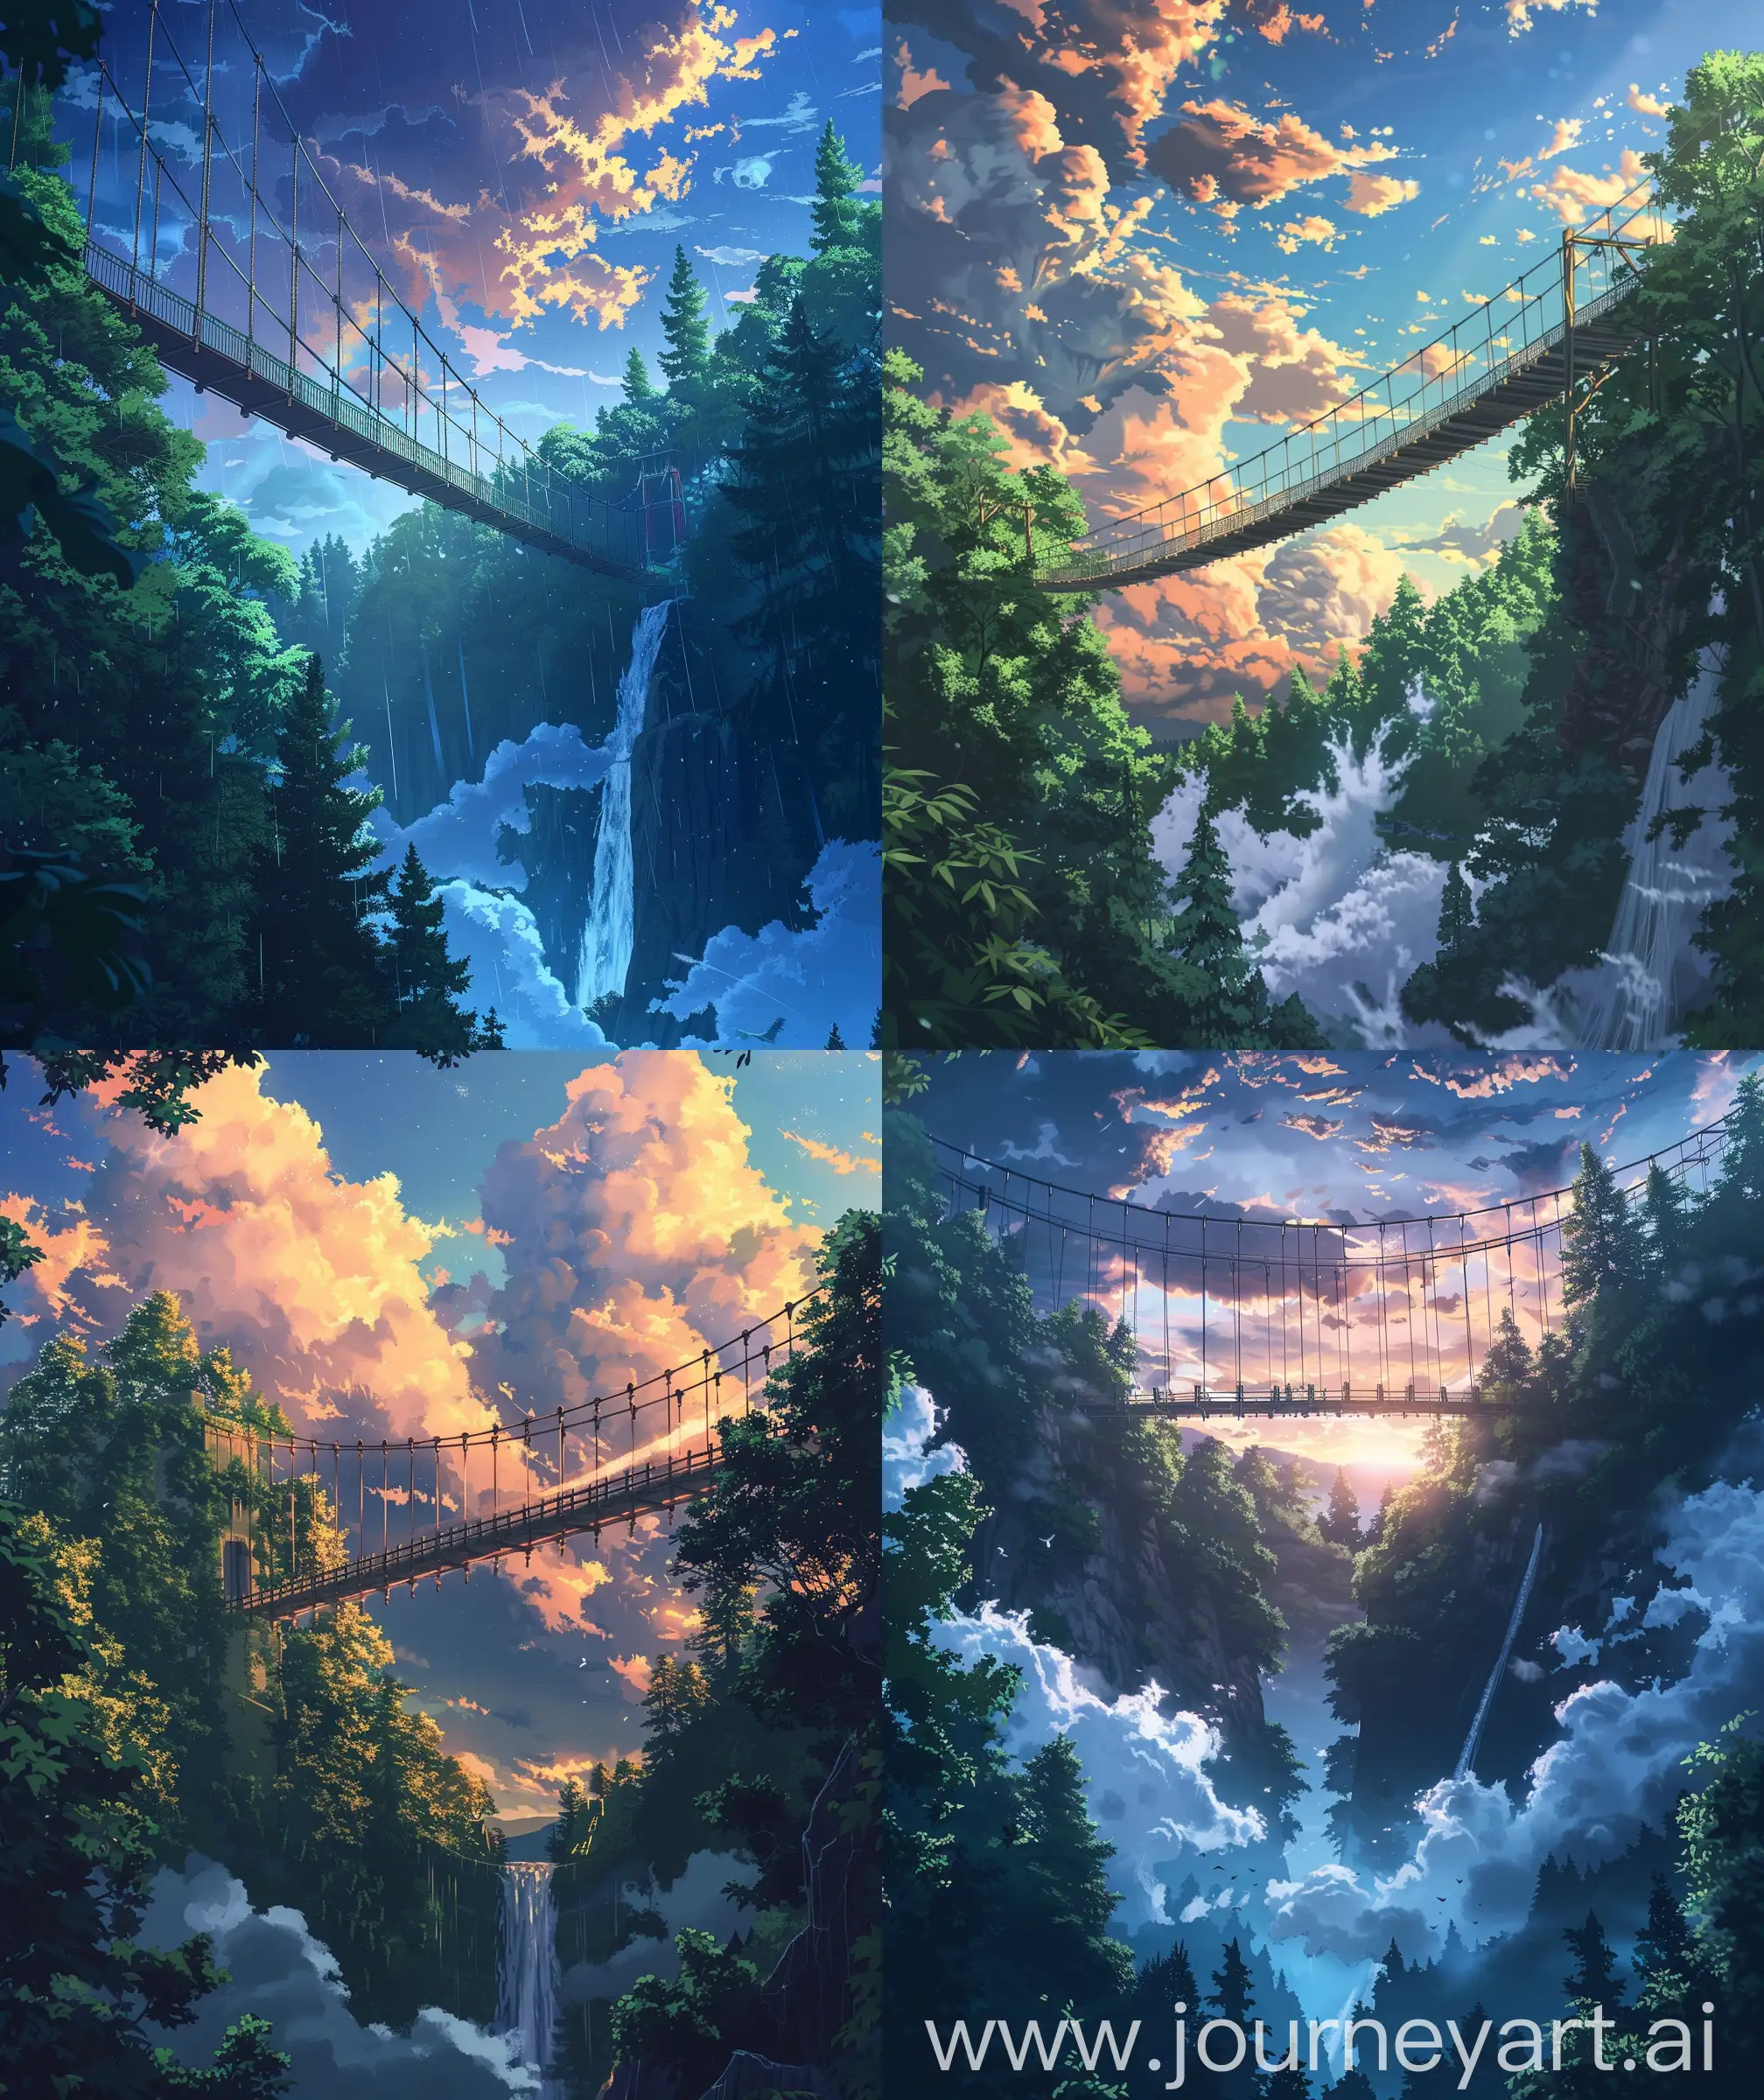 Anime scenary, dawn time, illustration, forest, direct front facade view of hanging bridge connect to high hill, clouds beside bridge, waterfall, adventure view, beautiful anime look, beautiful anime scenary, High quality, HD, illustration, no blurry image, no hyperrealistic --ar 27:32 